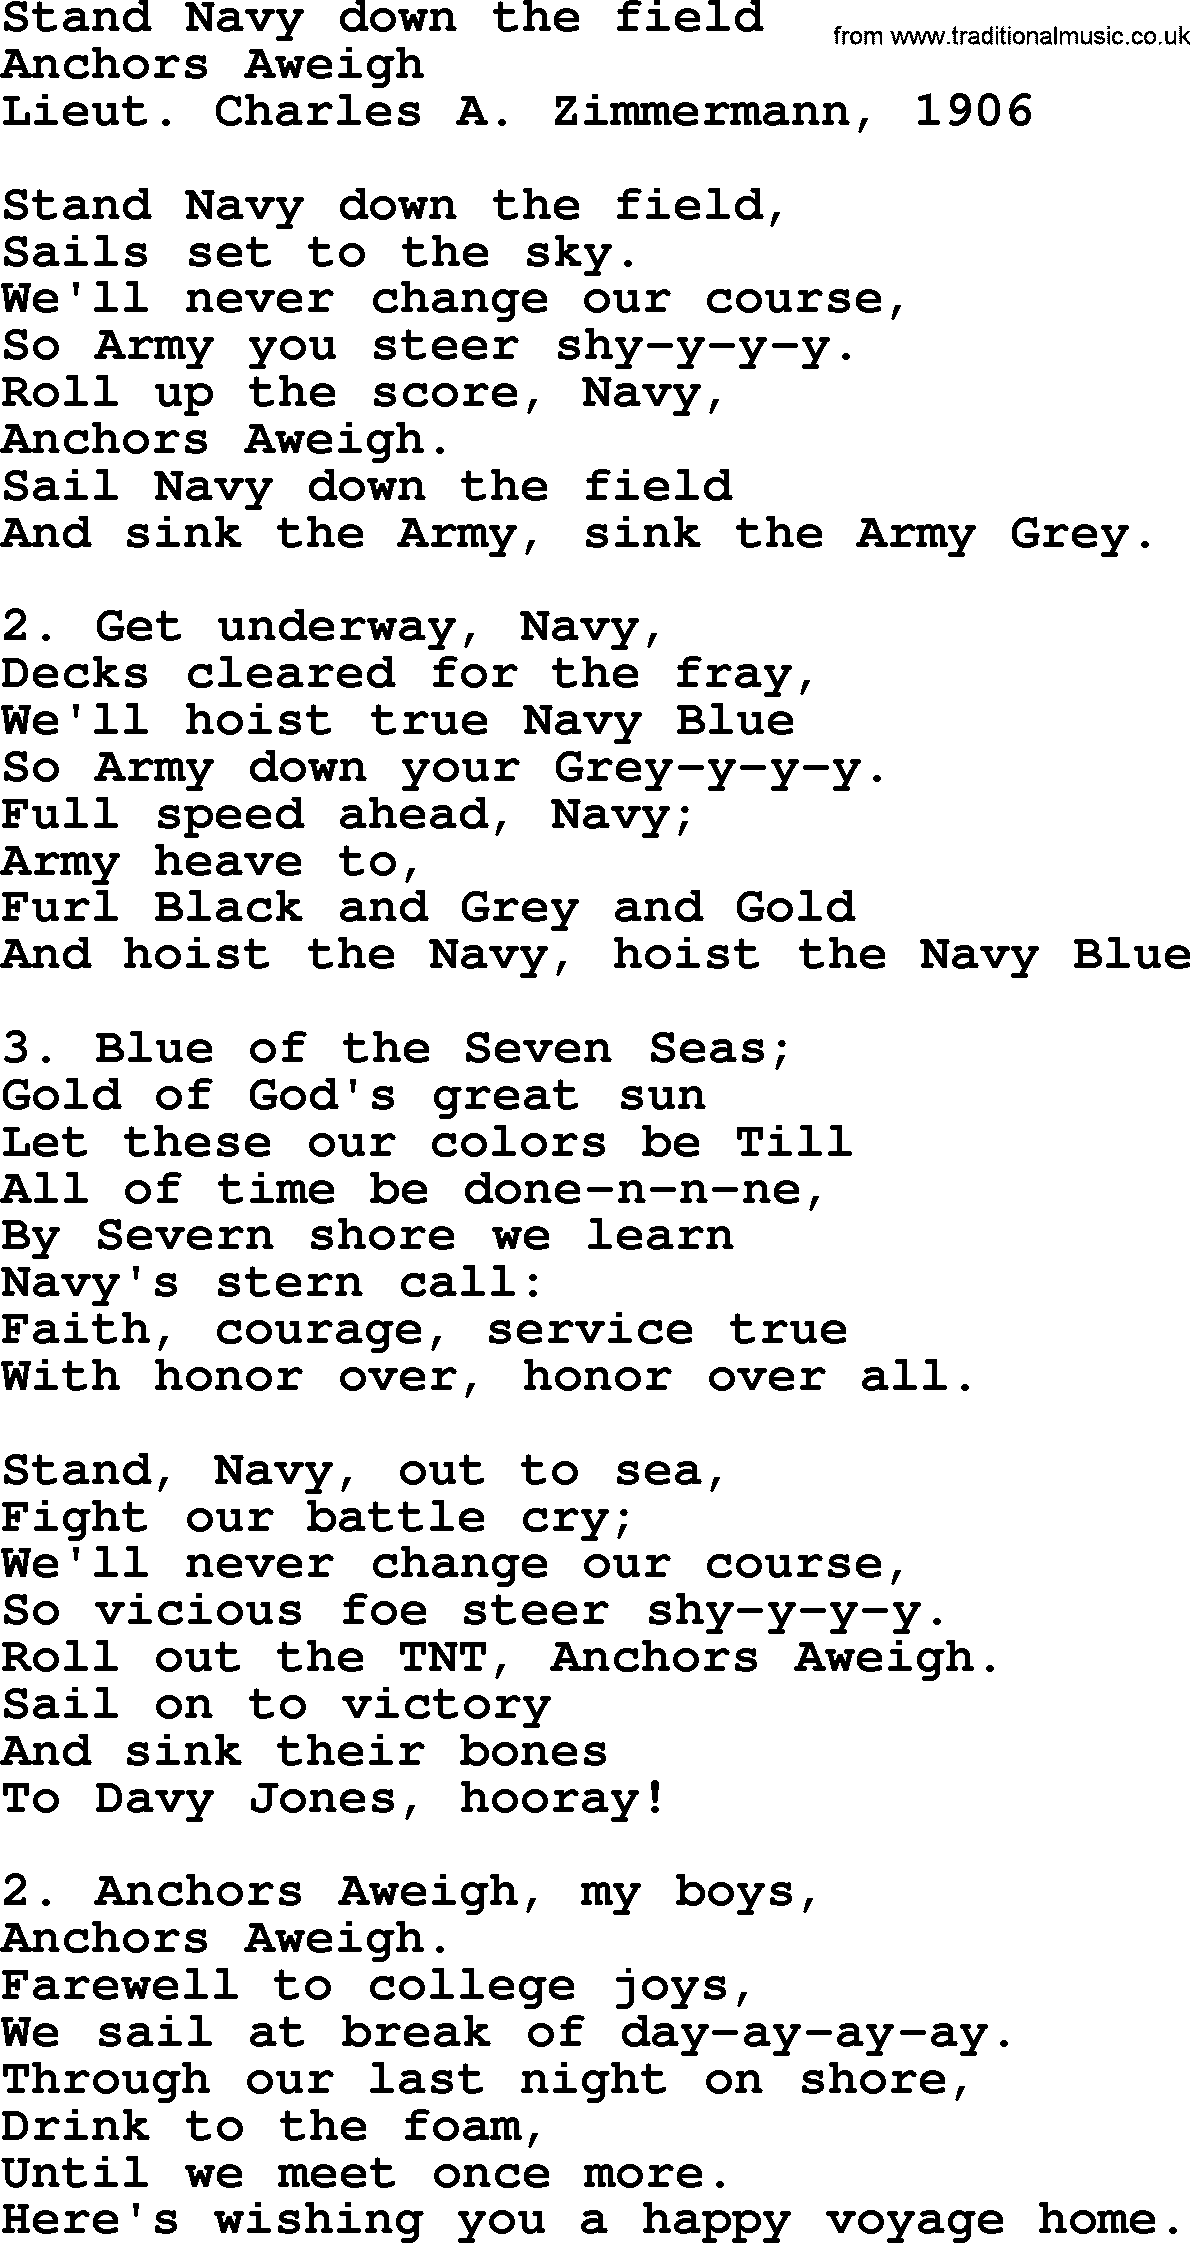 Sea Song or Shantie: Stand Navy Down The Field, lyrics